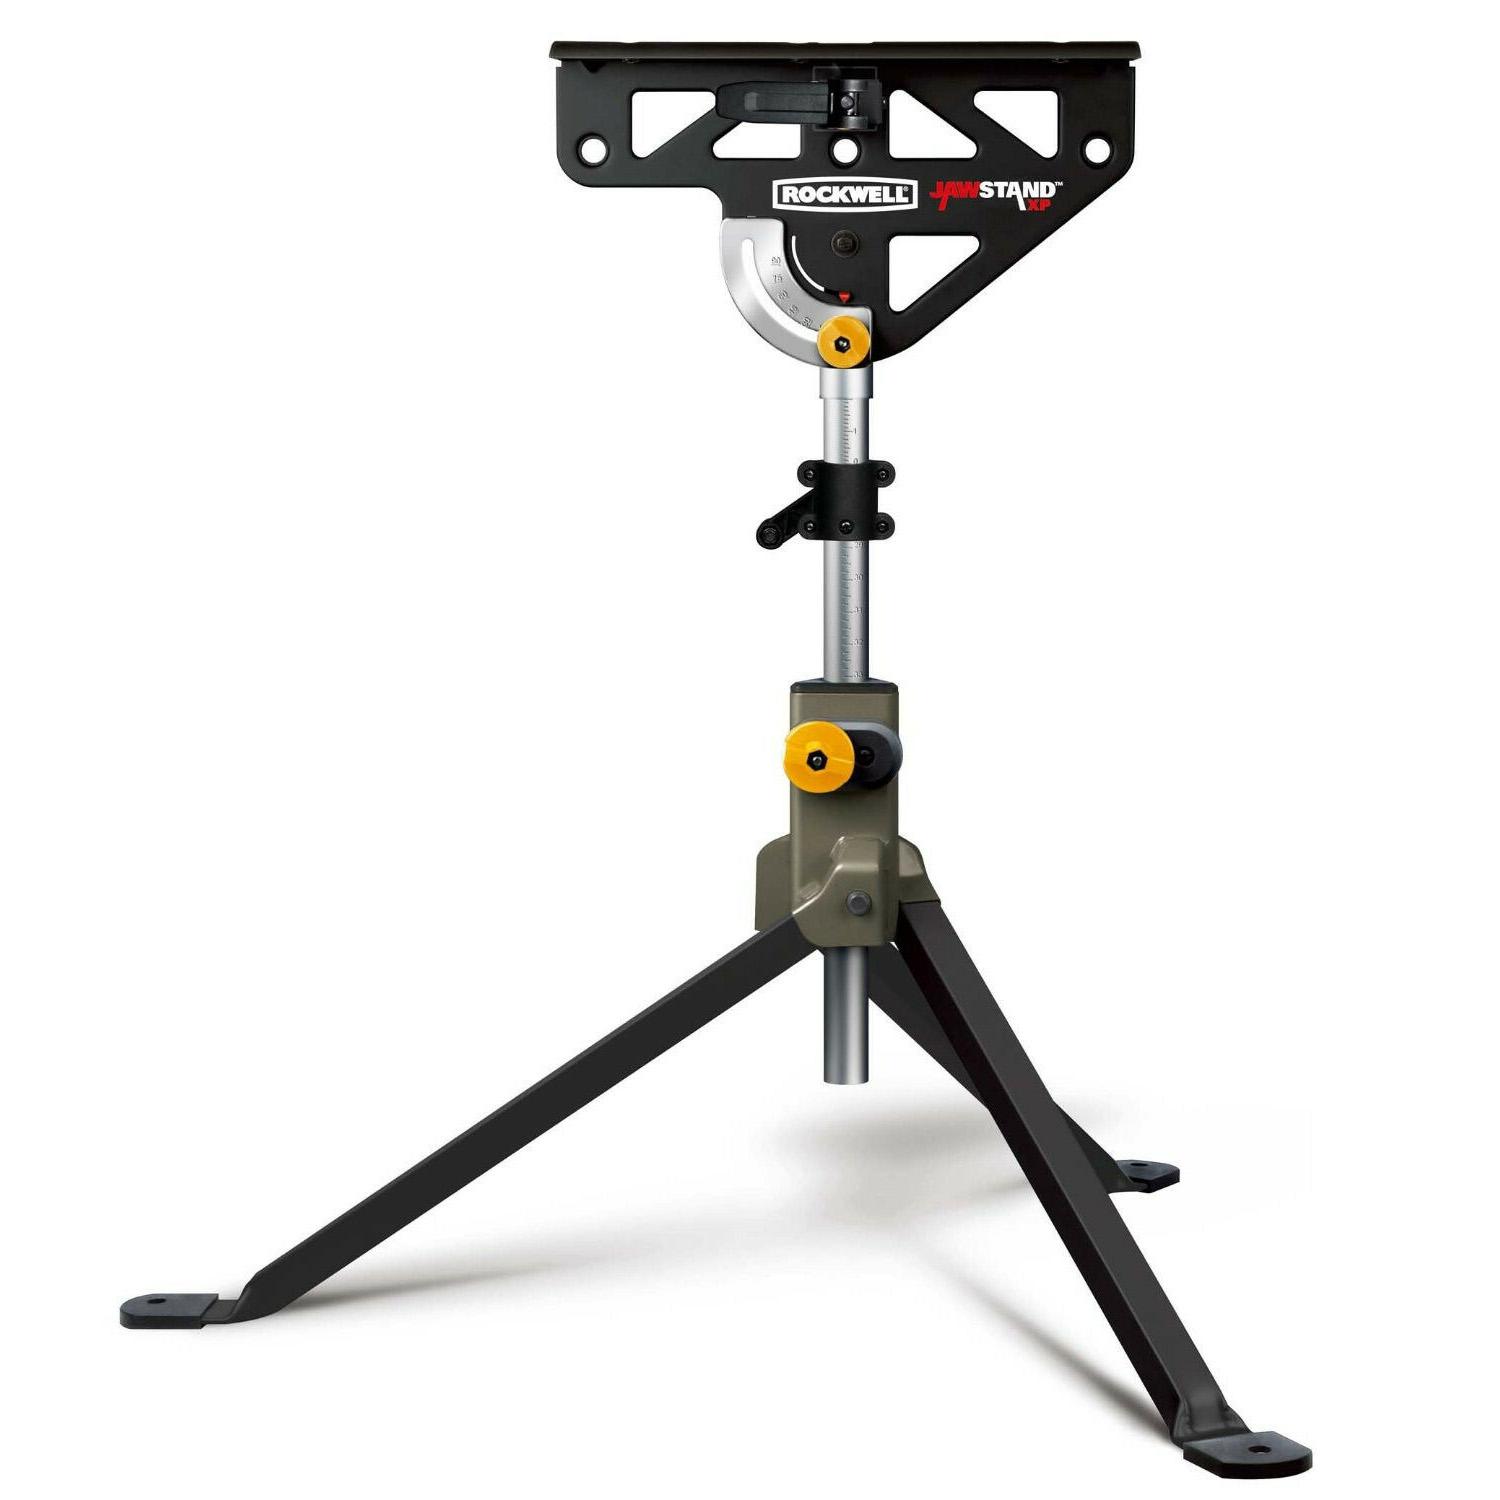 Rockwell JawStand XP Portable Work Support Stand for $64.99 Shipped